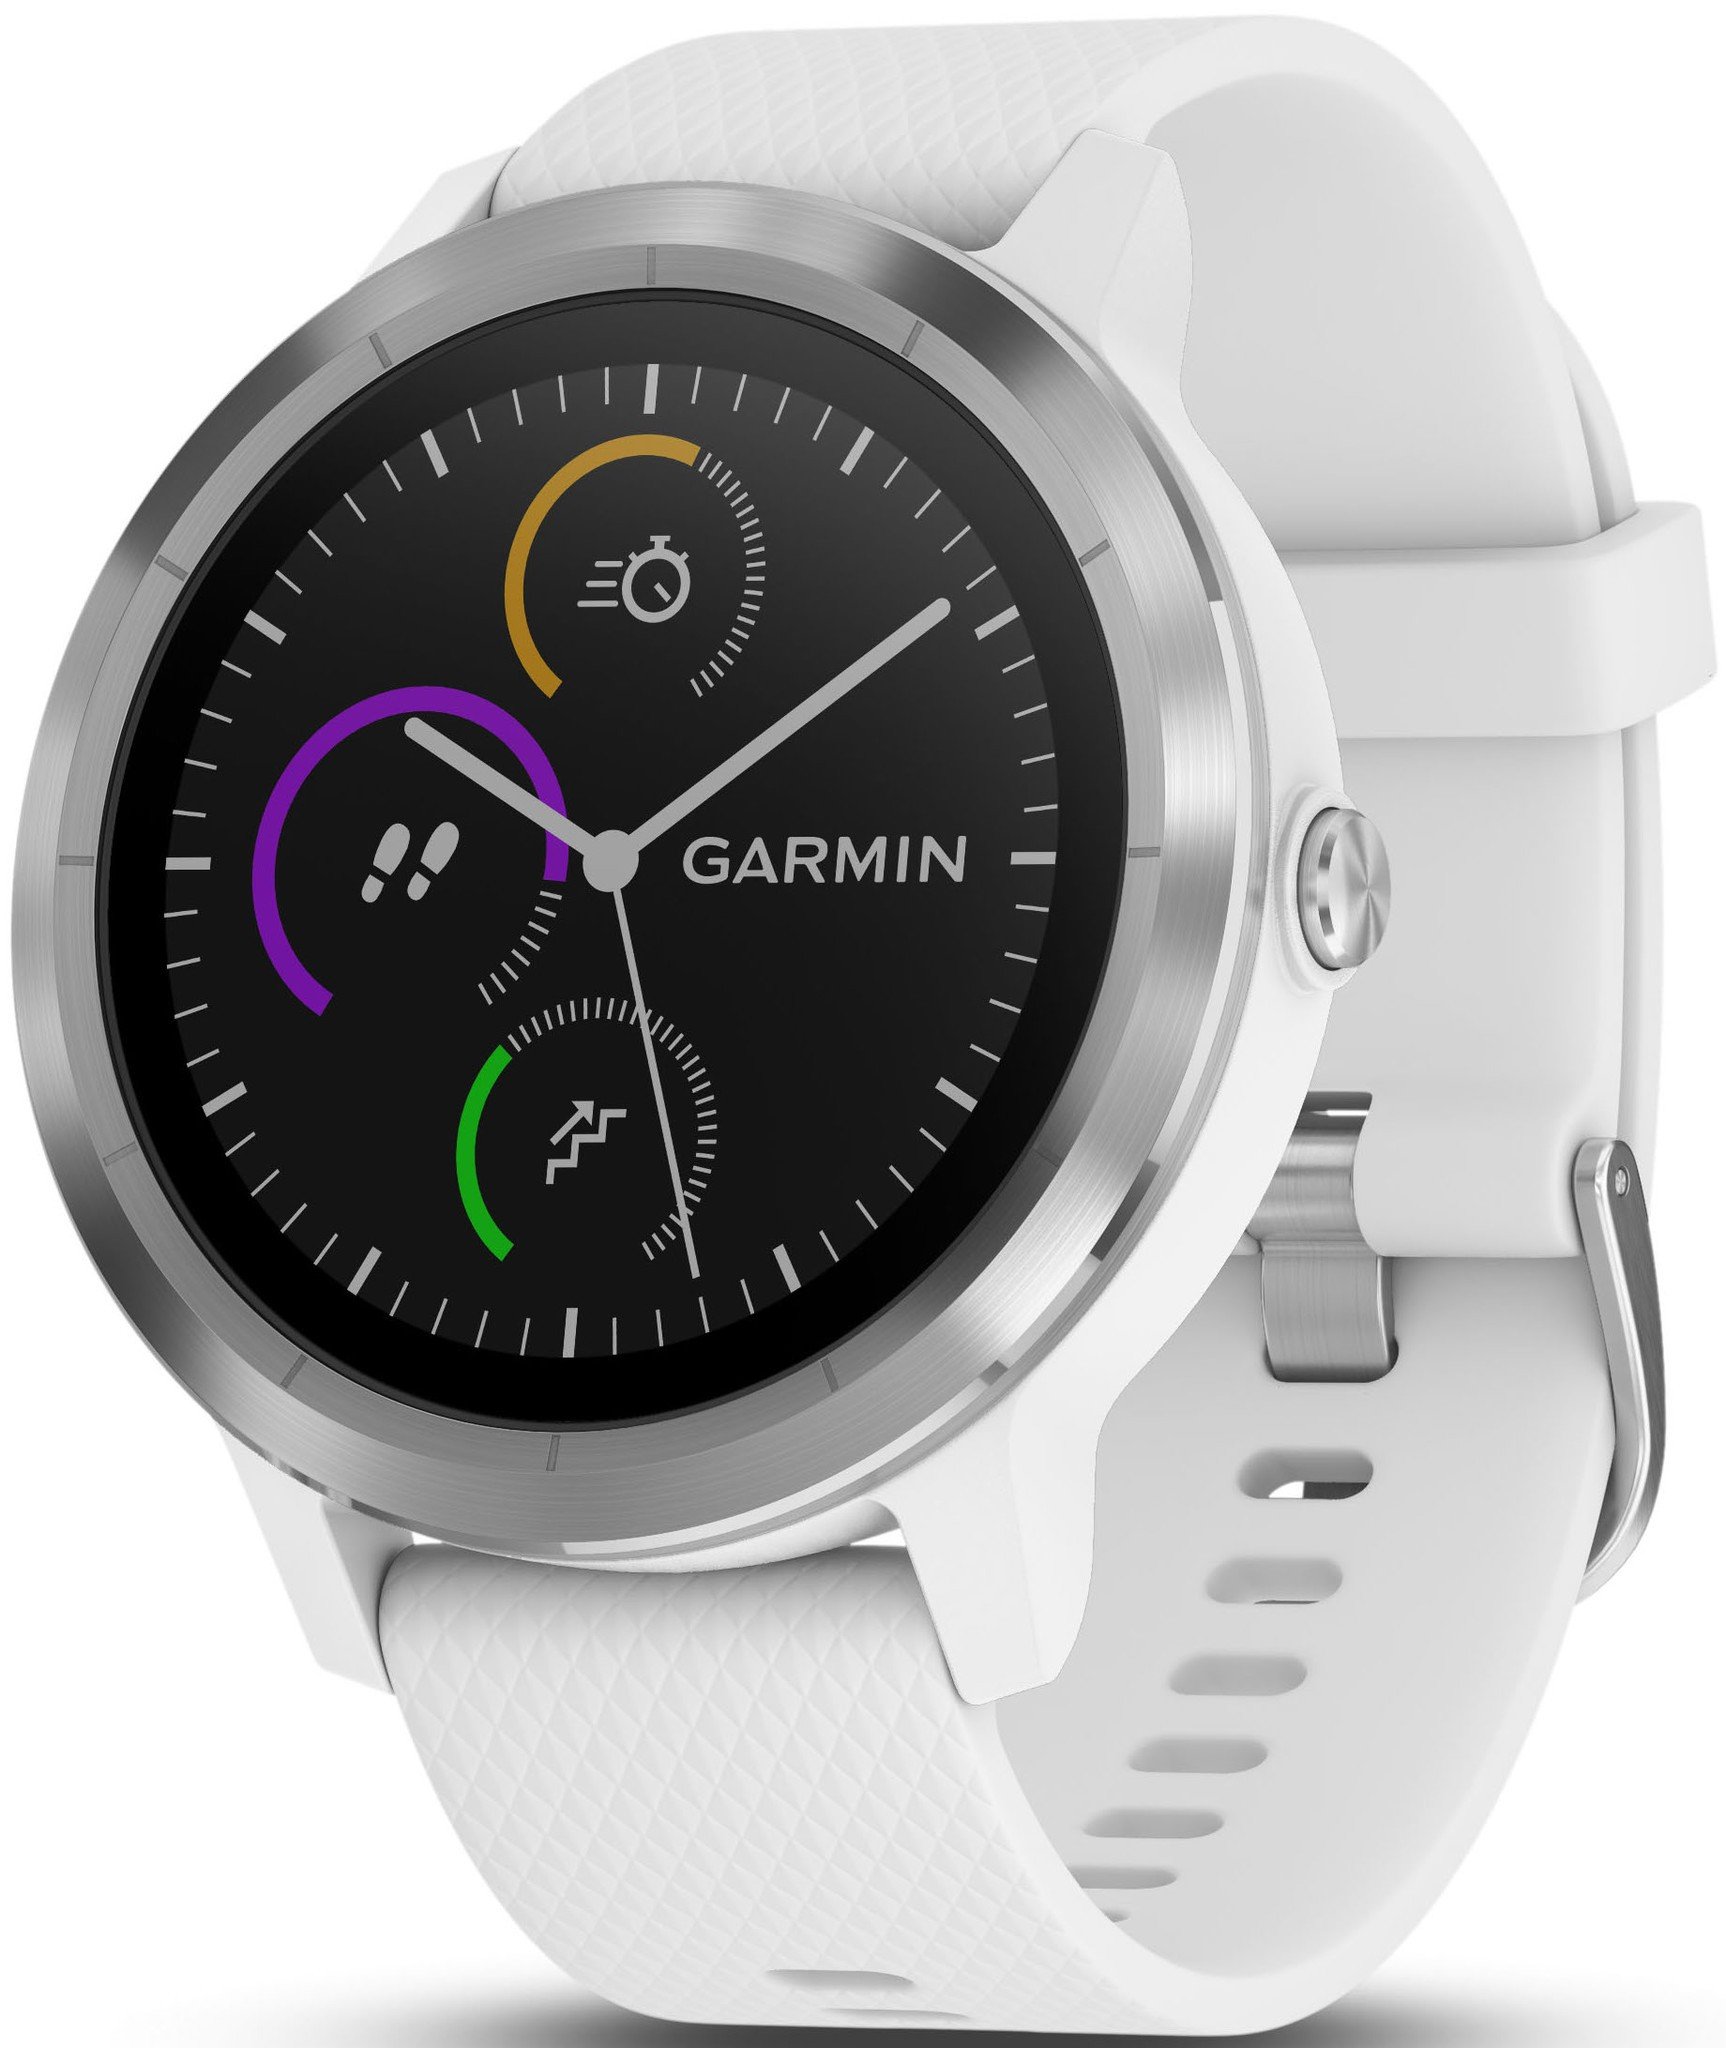 https://www.androidcentral.com/sites/androidcentral.com/files/article_images/2019/11/garmin-vivoactive3-official-render.jpg?itok=LeaZVquO